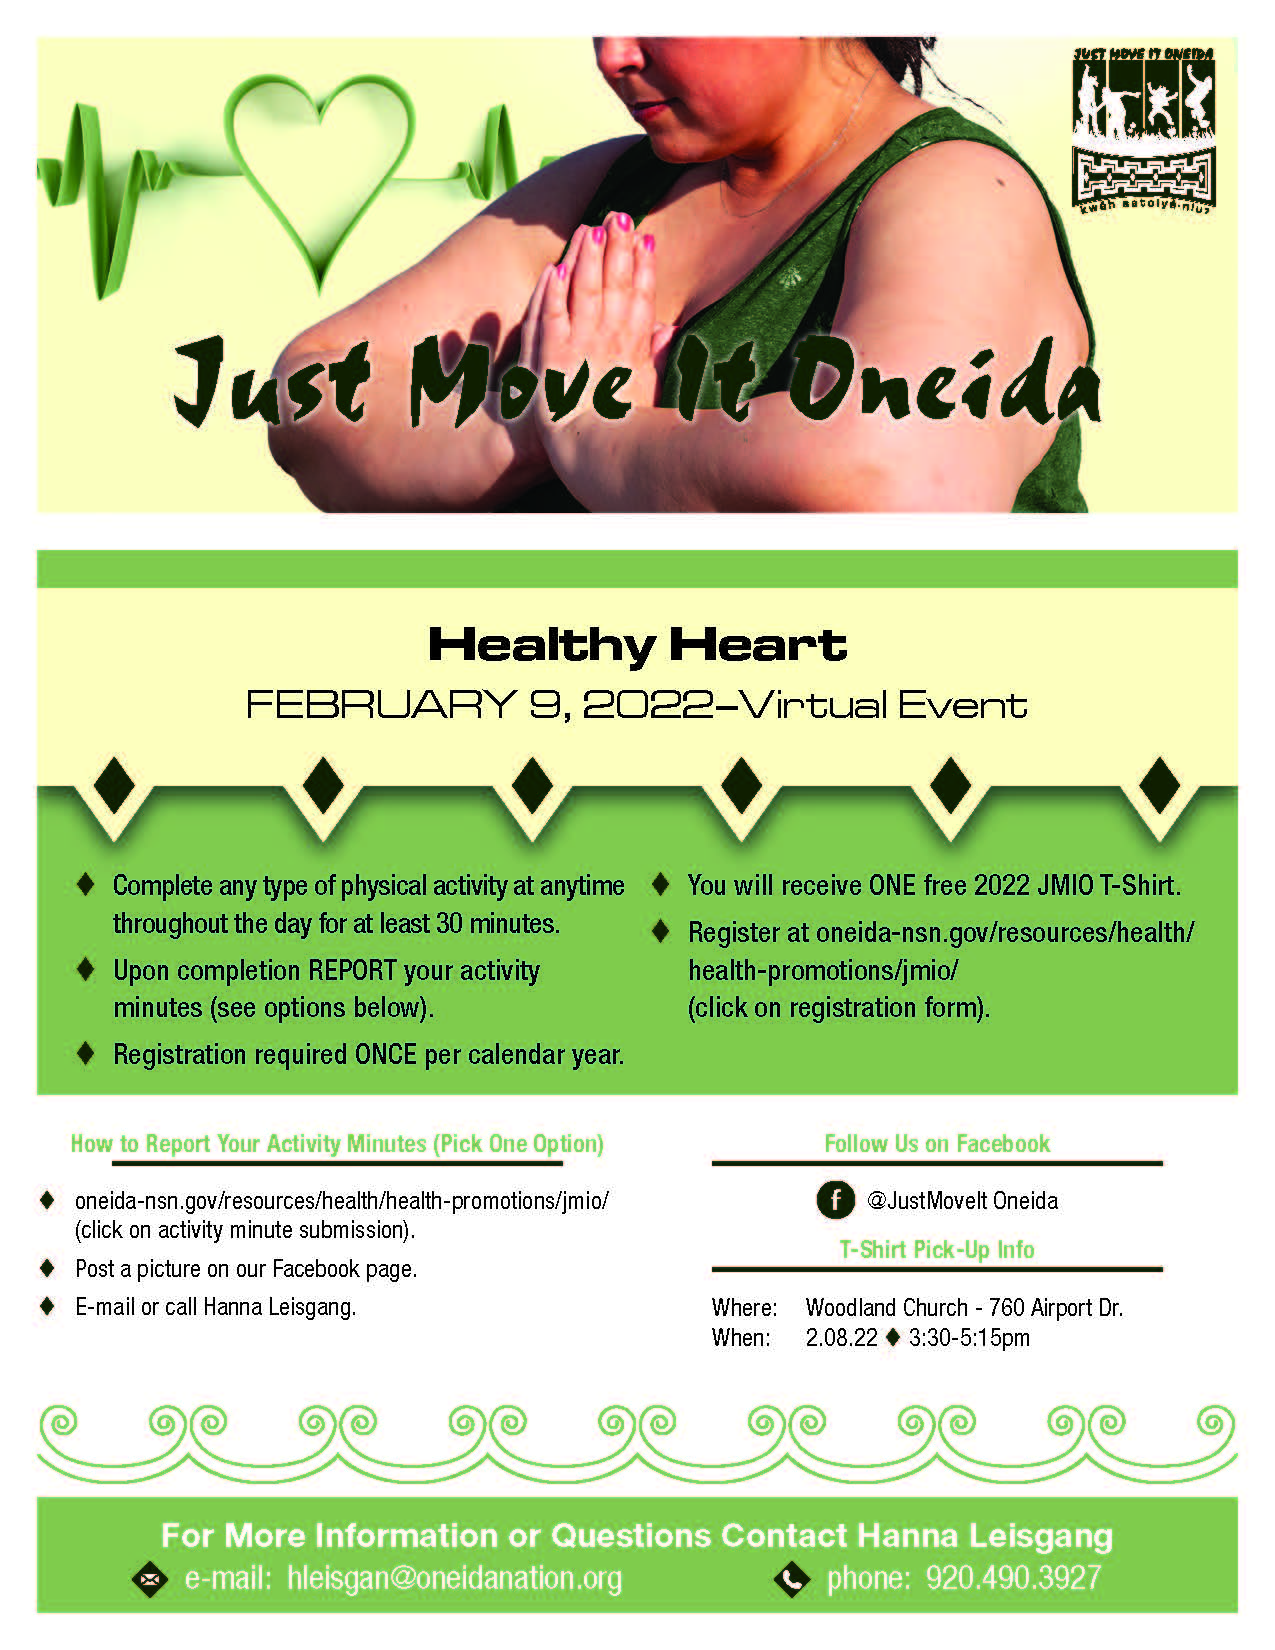 JMIO Healthy Heart @ Virtual: complete any type of physical activity anywhere